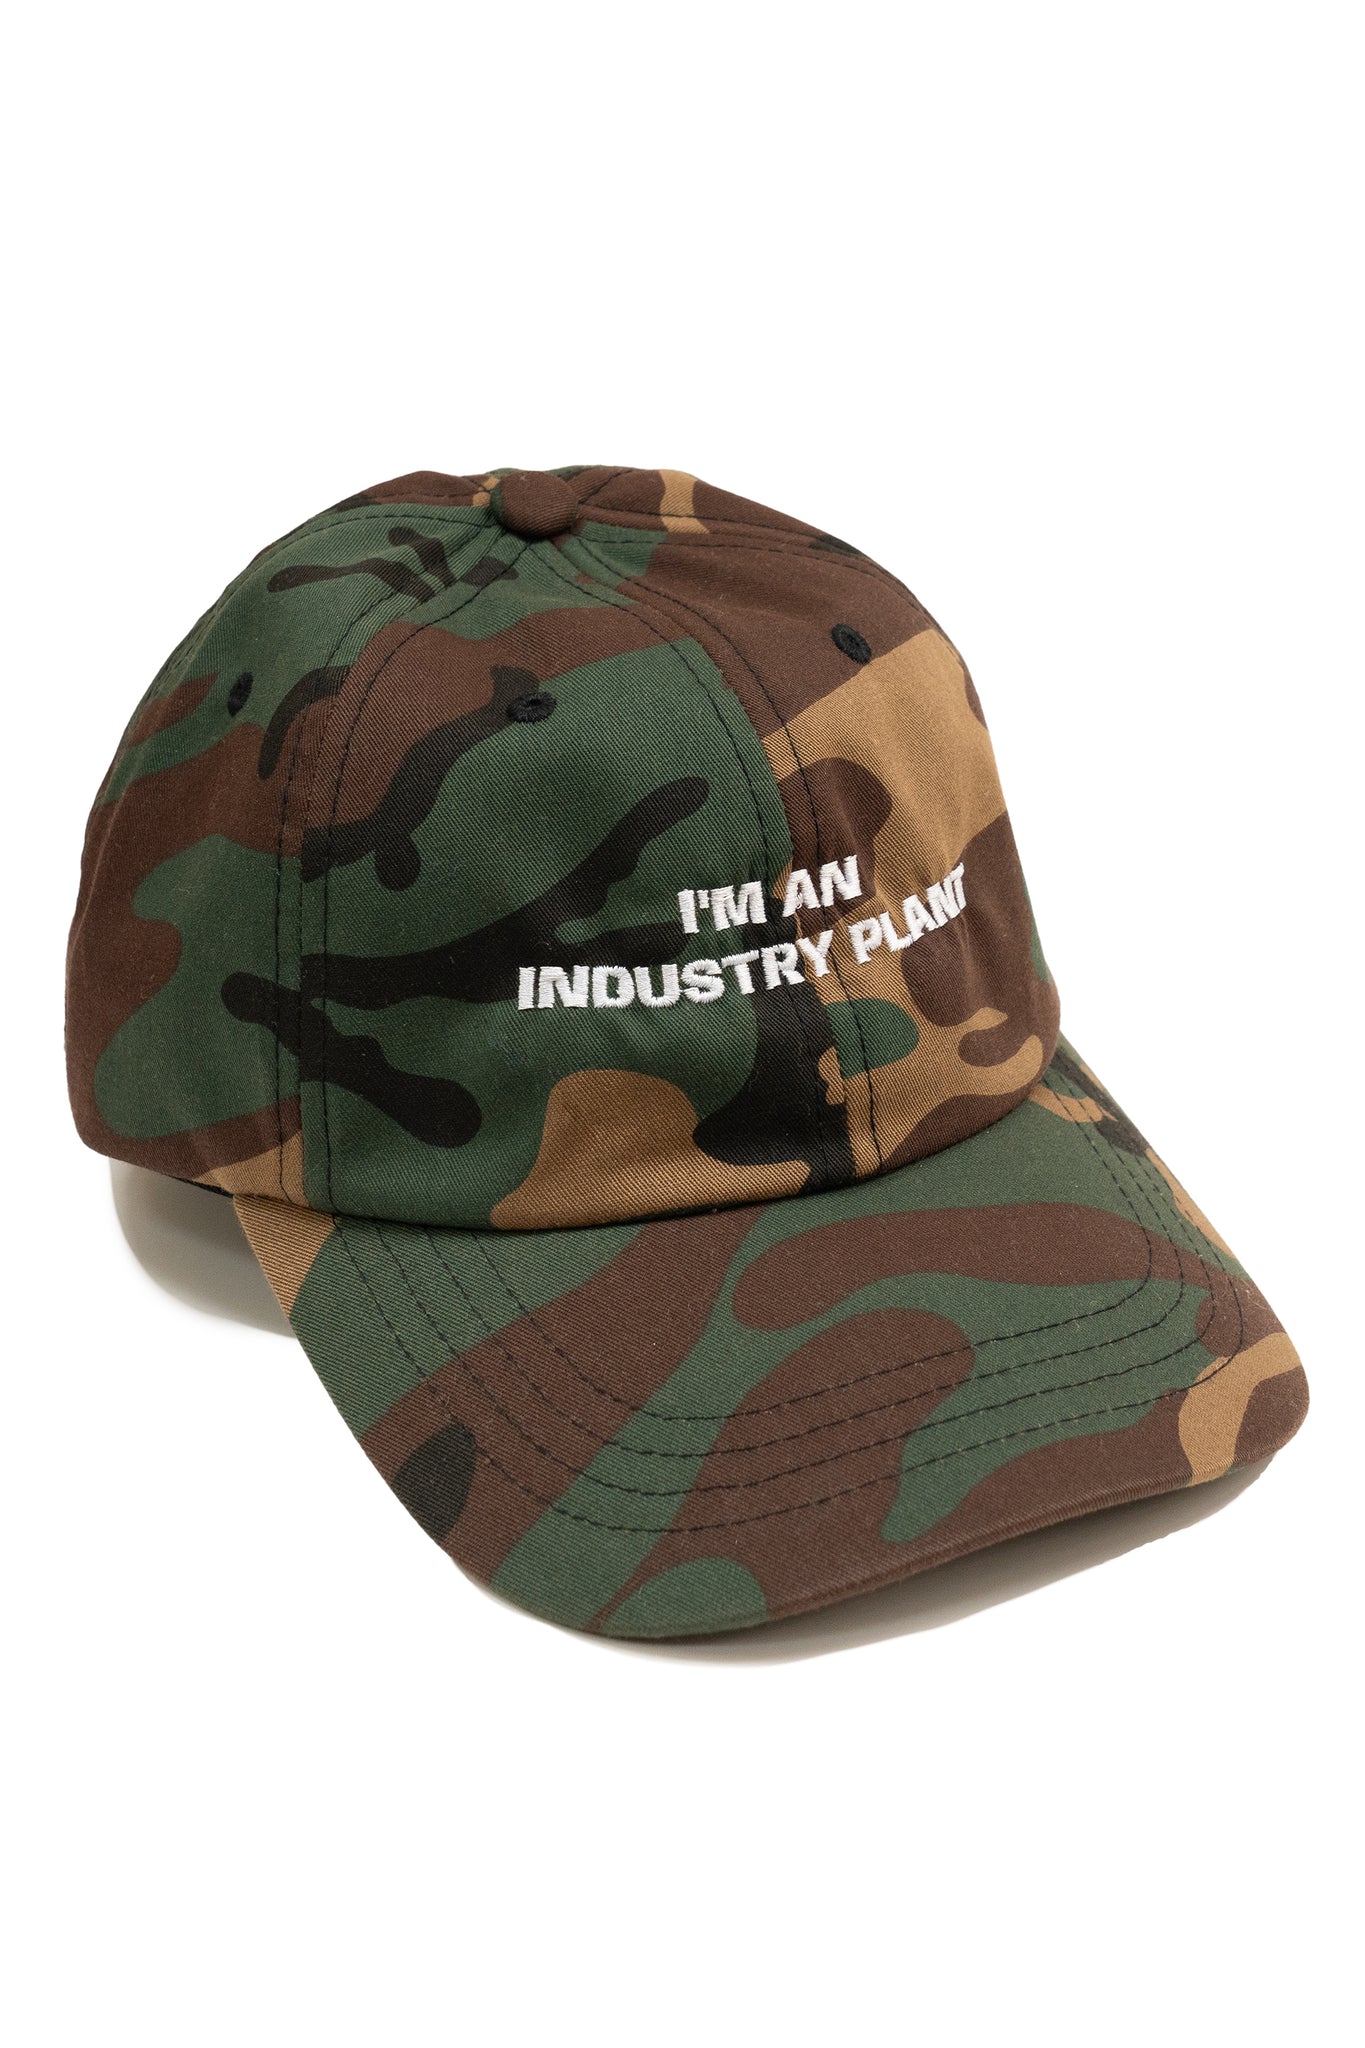 INDUSTRY PLANT HAT